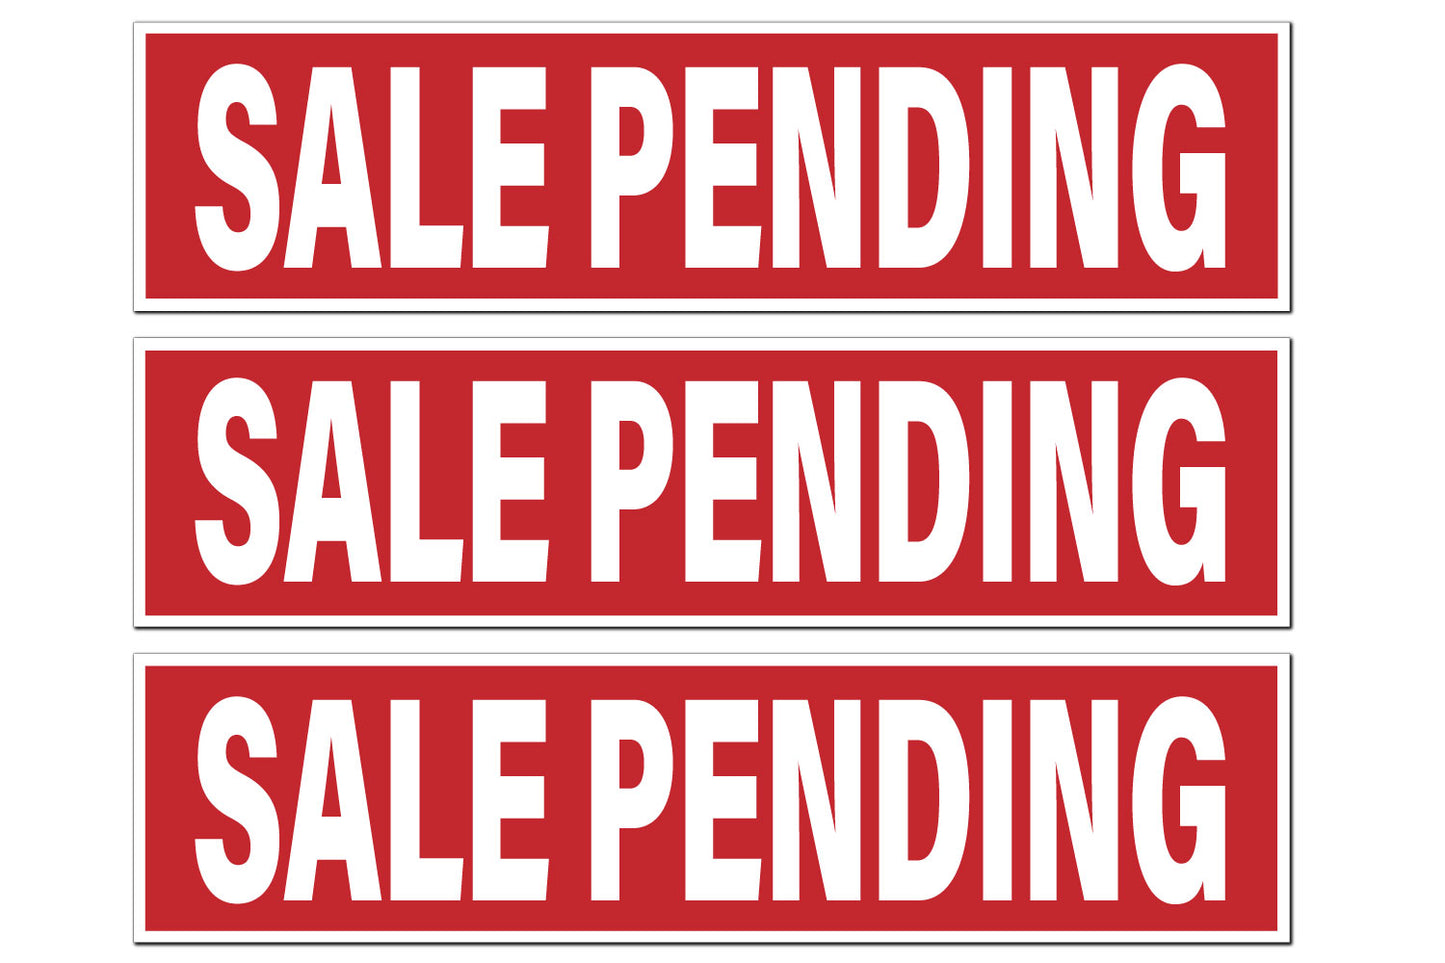 Sale Pending sign riders for the real estate industry. Sign riders feature bold white text on a red background.